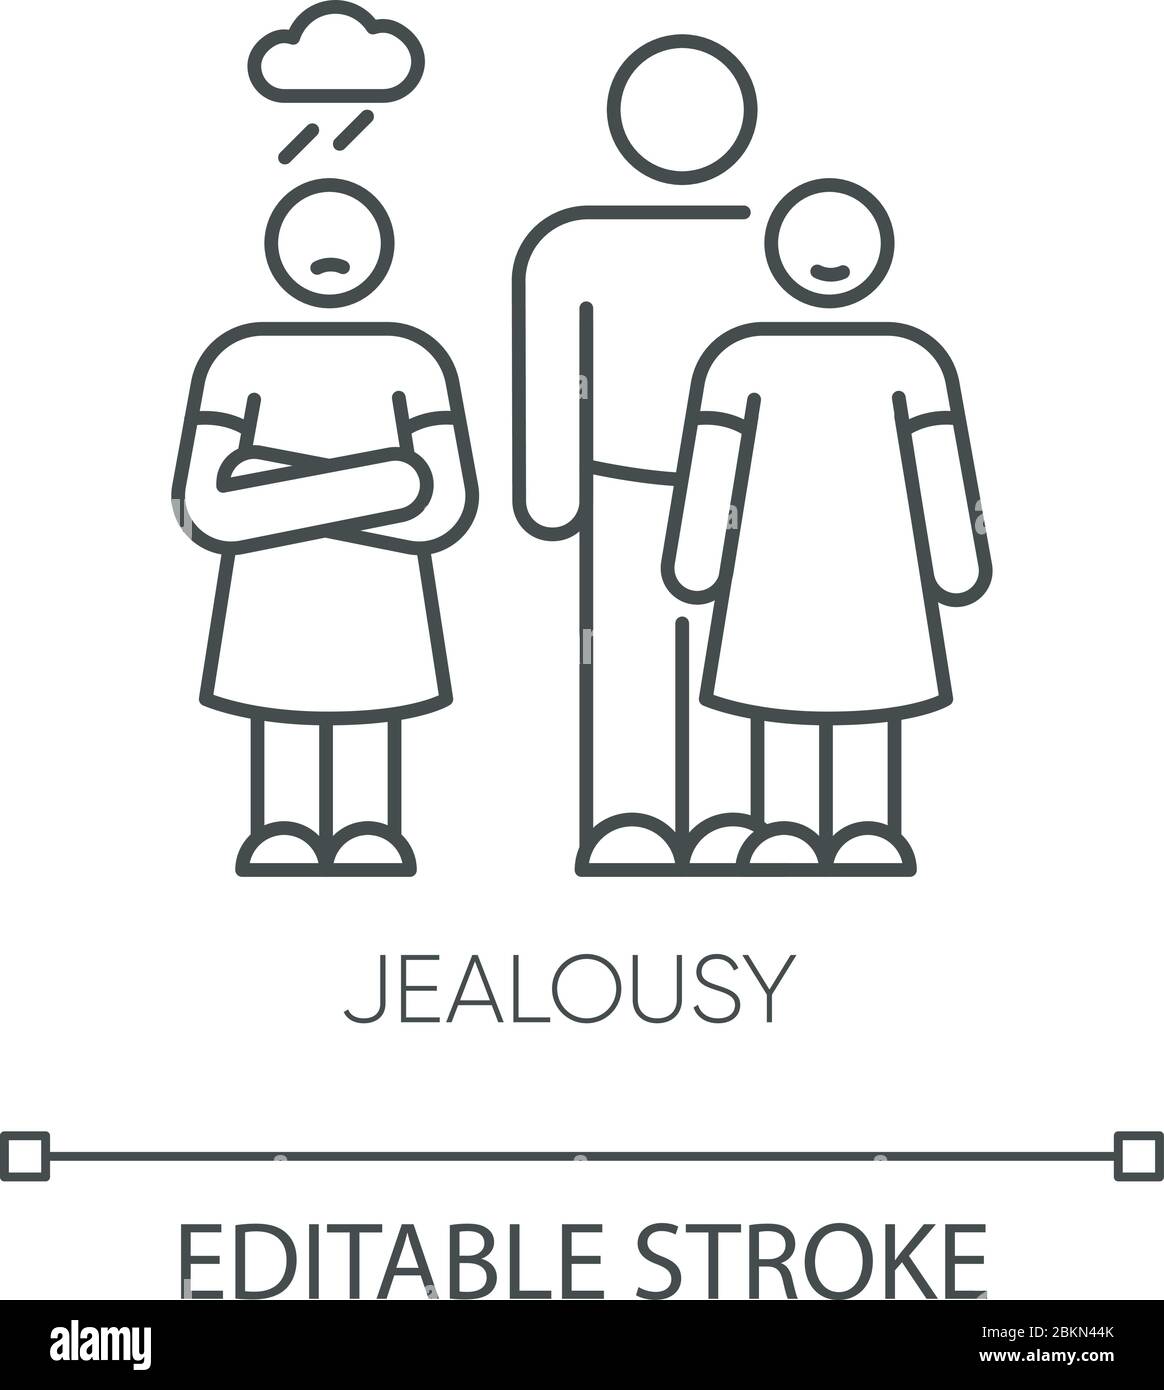 Jealousy pixel perfect linear icon Stock Vector